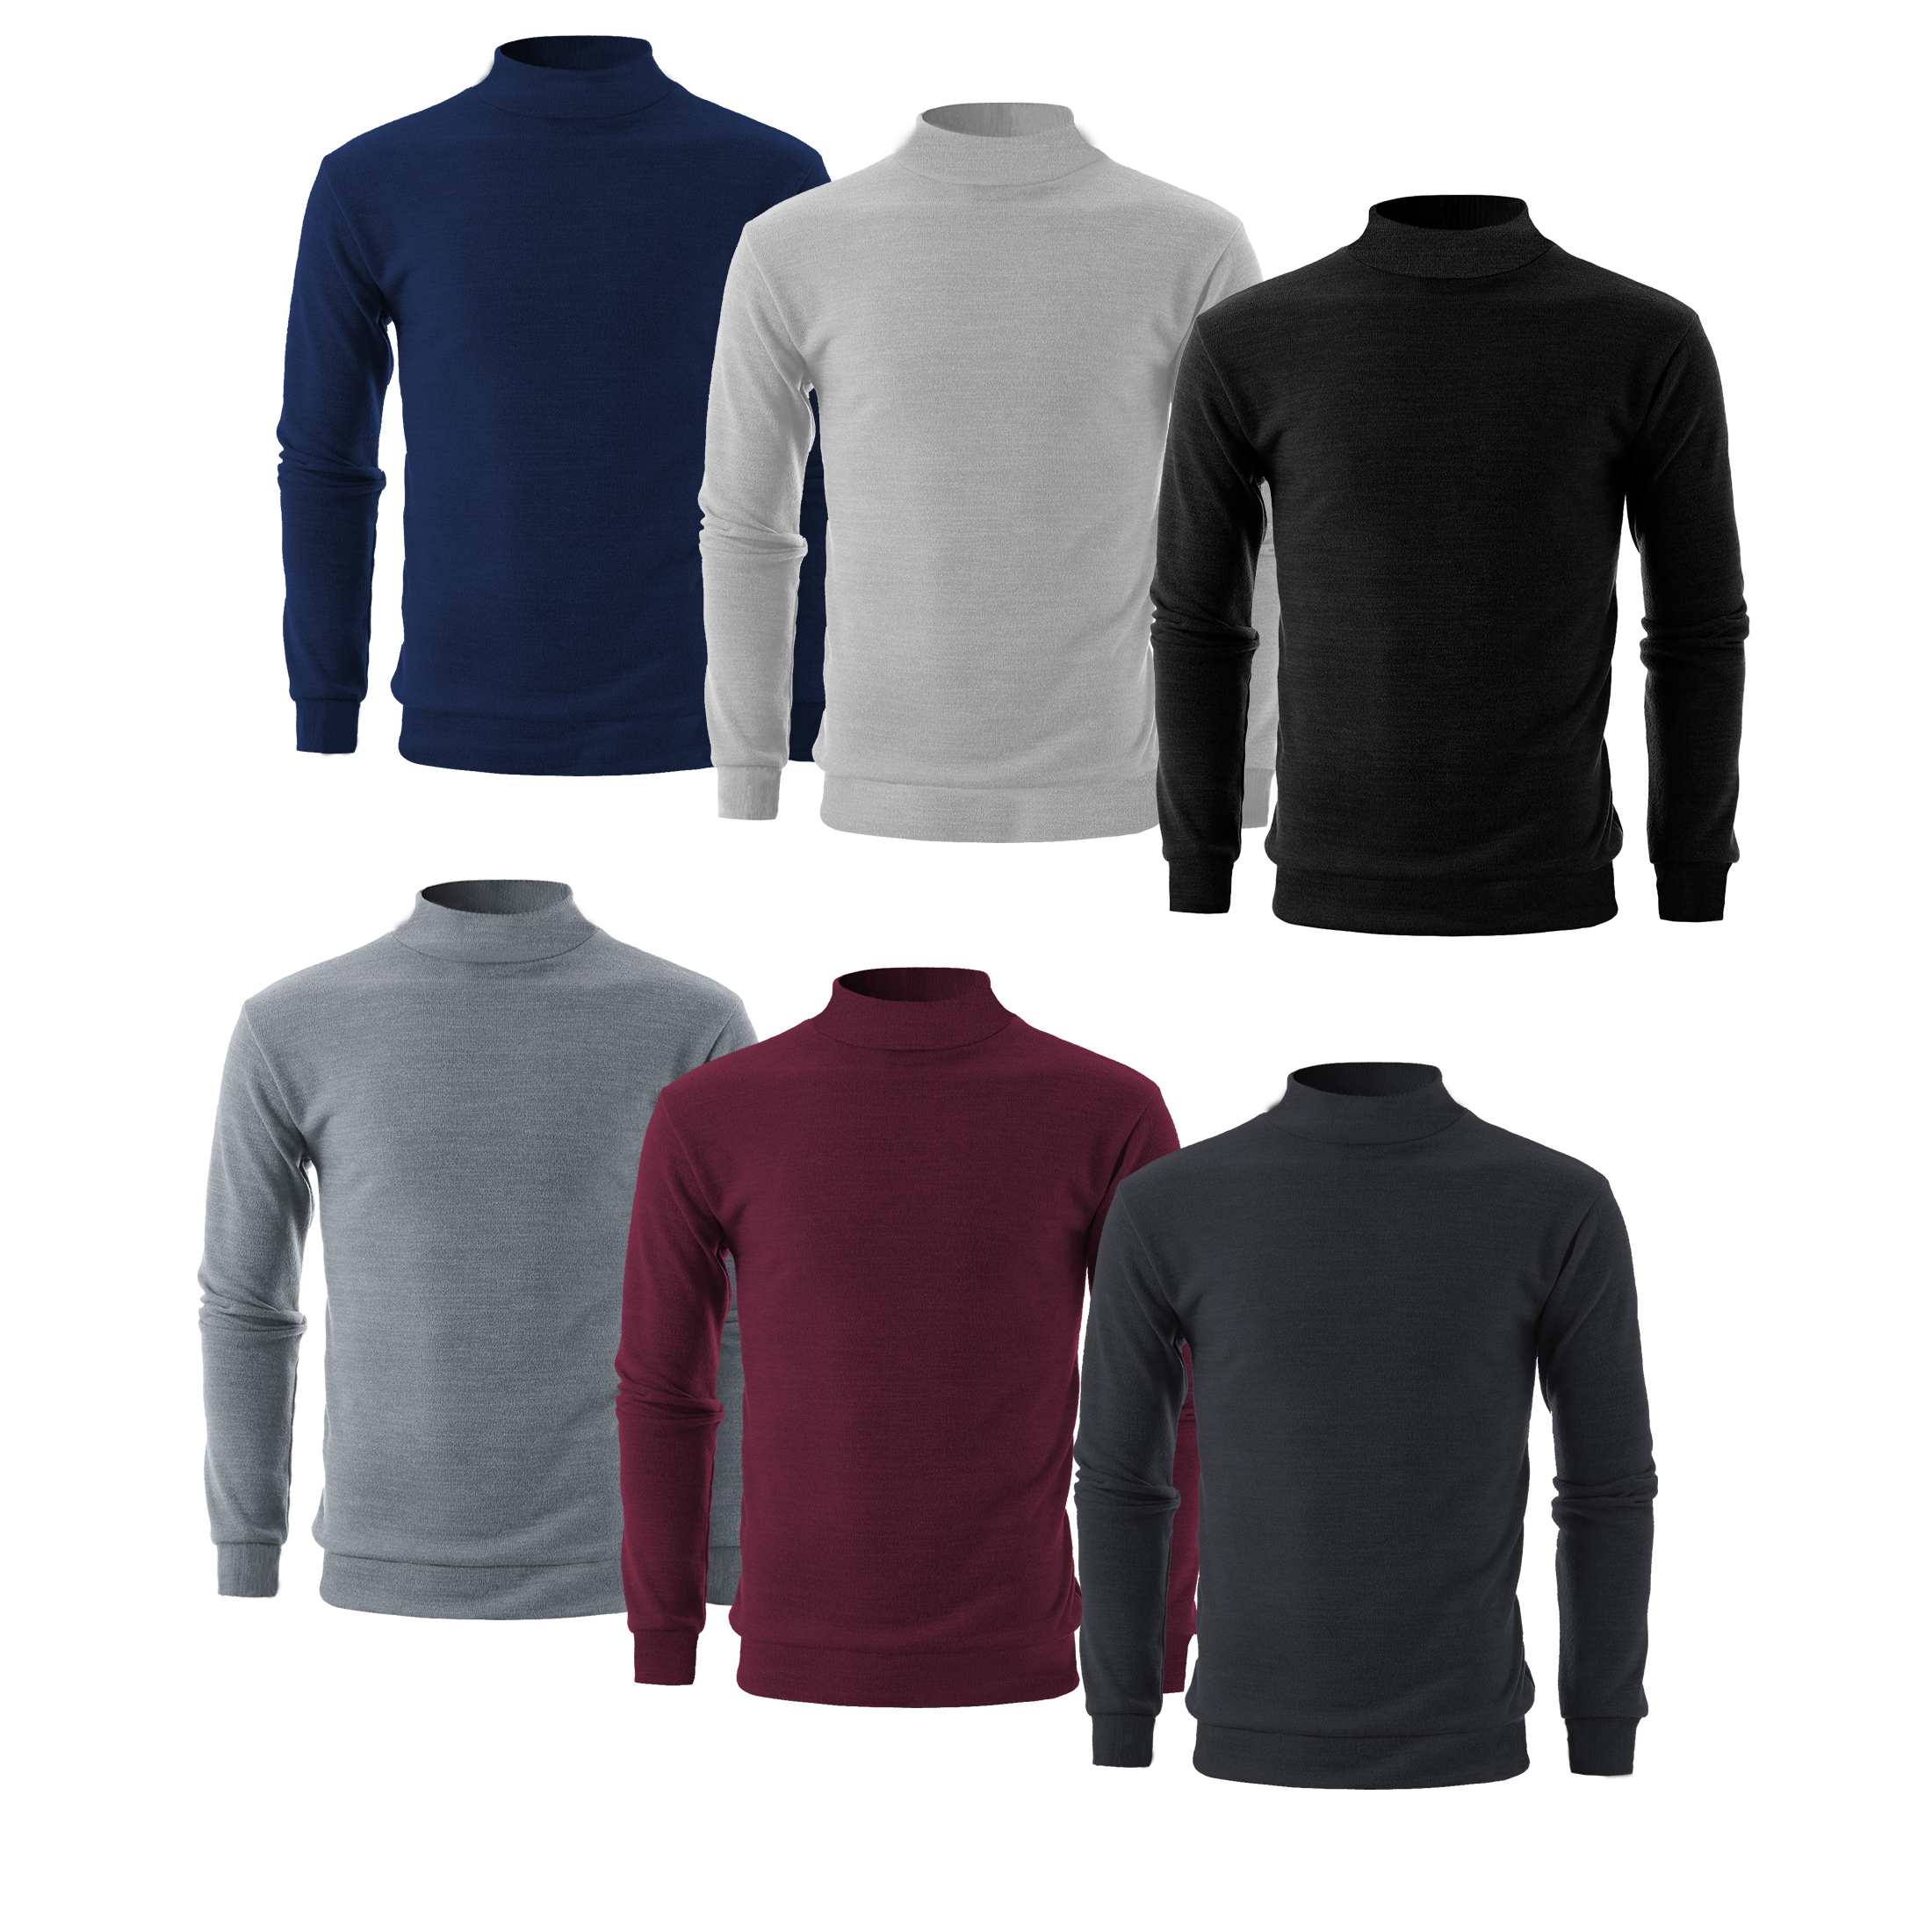 2 Pack:Men's Slim Fit Long Sleeve Casual Mock Neck Pullover Sweater - Small